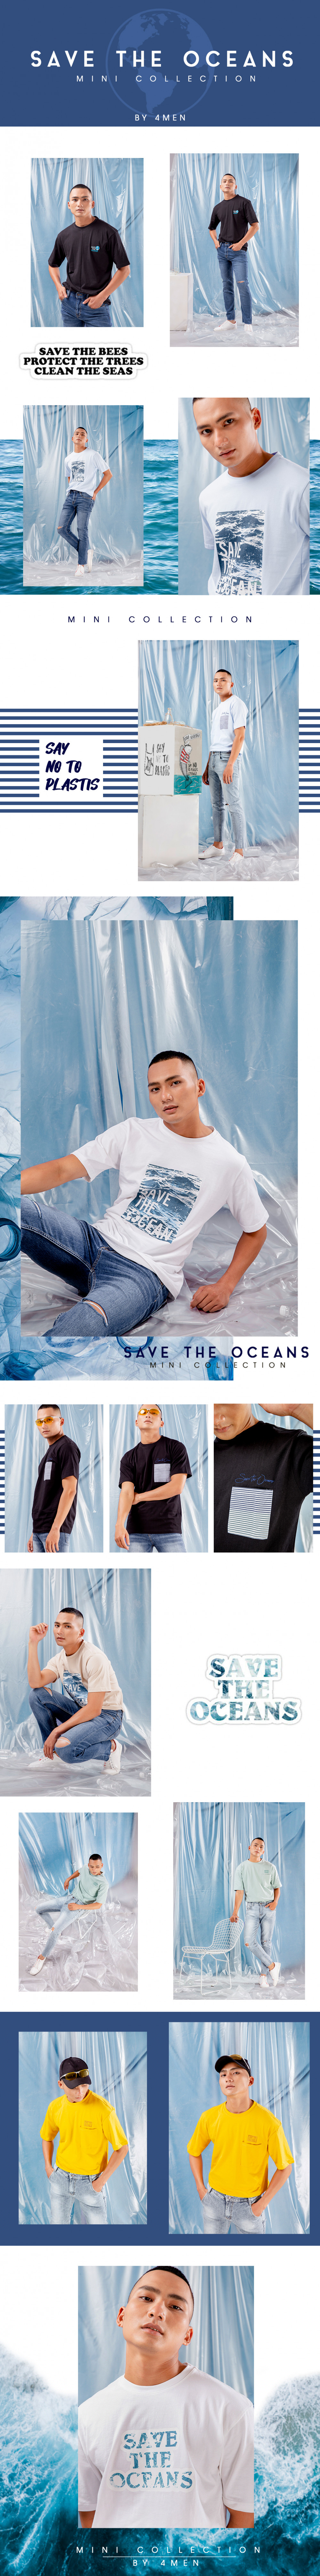 Save the oceans - mini collection - 1